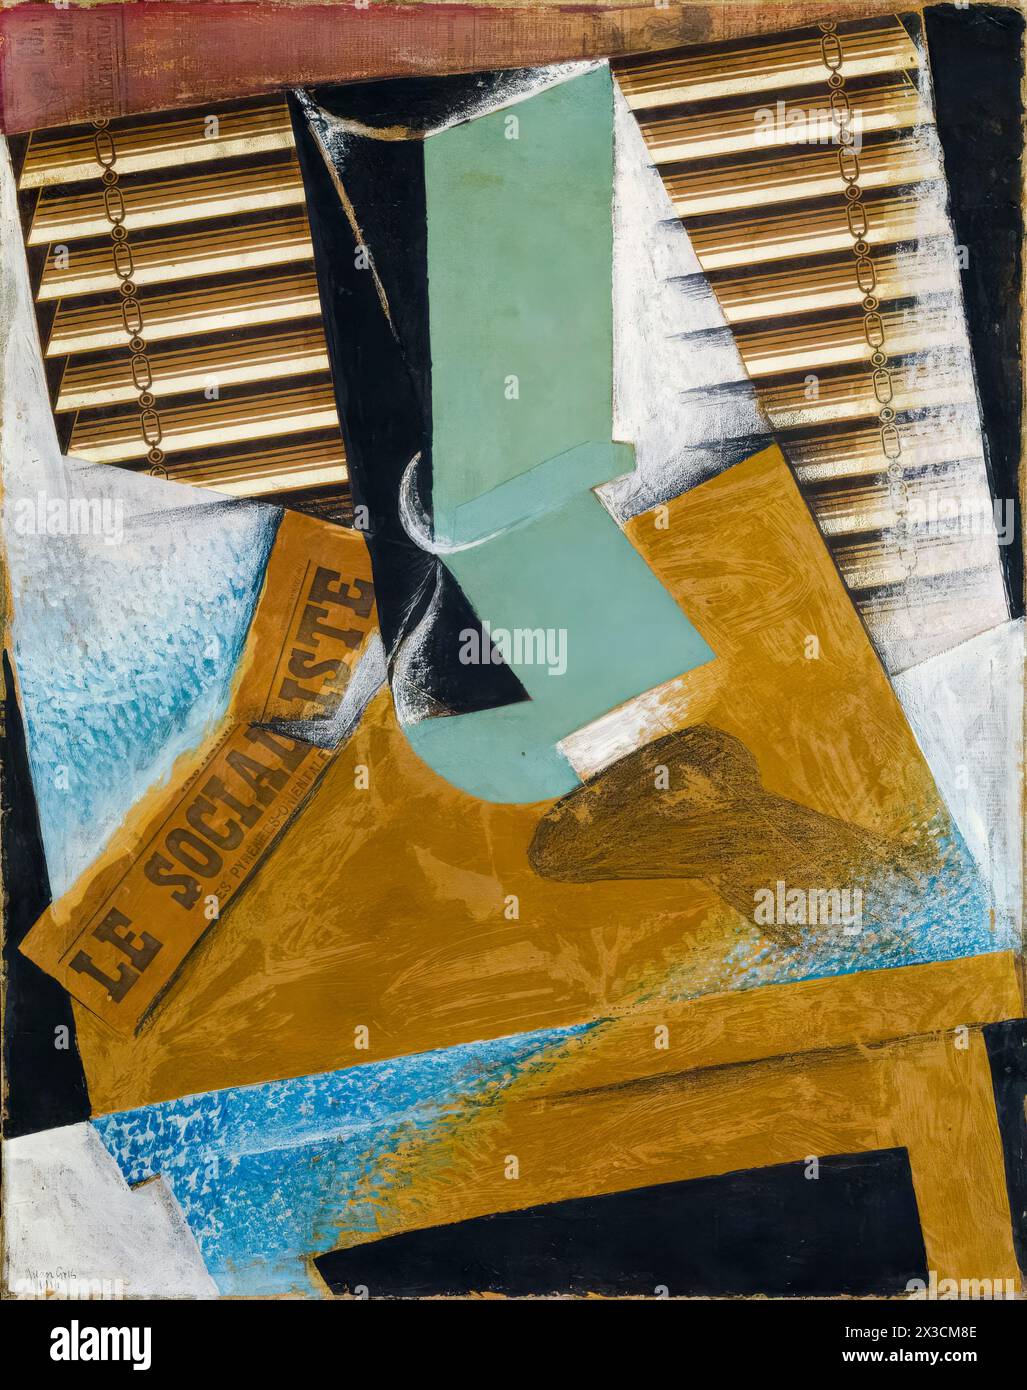 Juan Gris, The Sunblind, abstract painting collage on canvas, 1914 Stock Photo